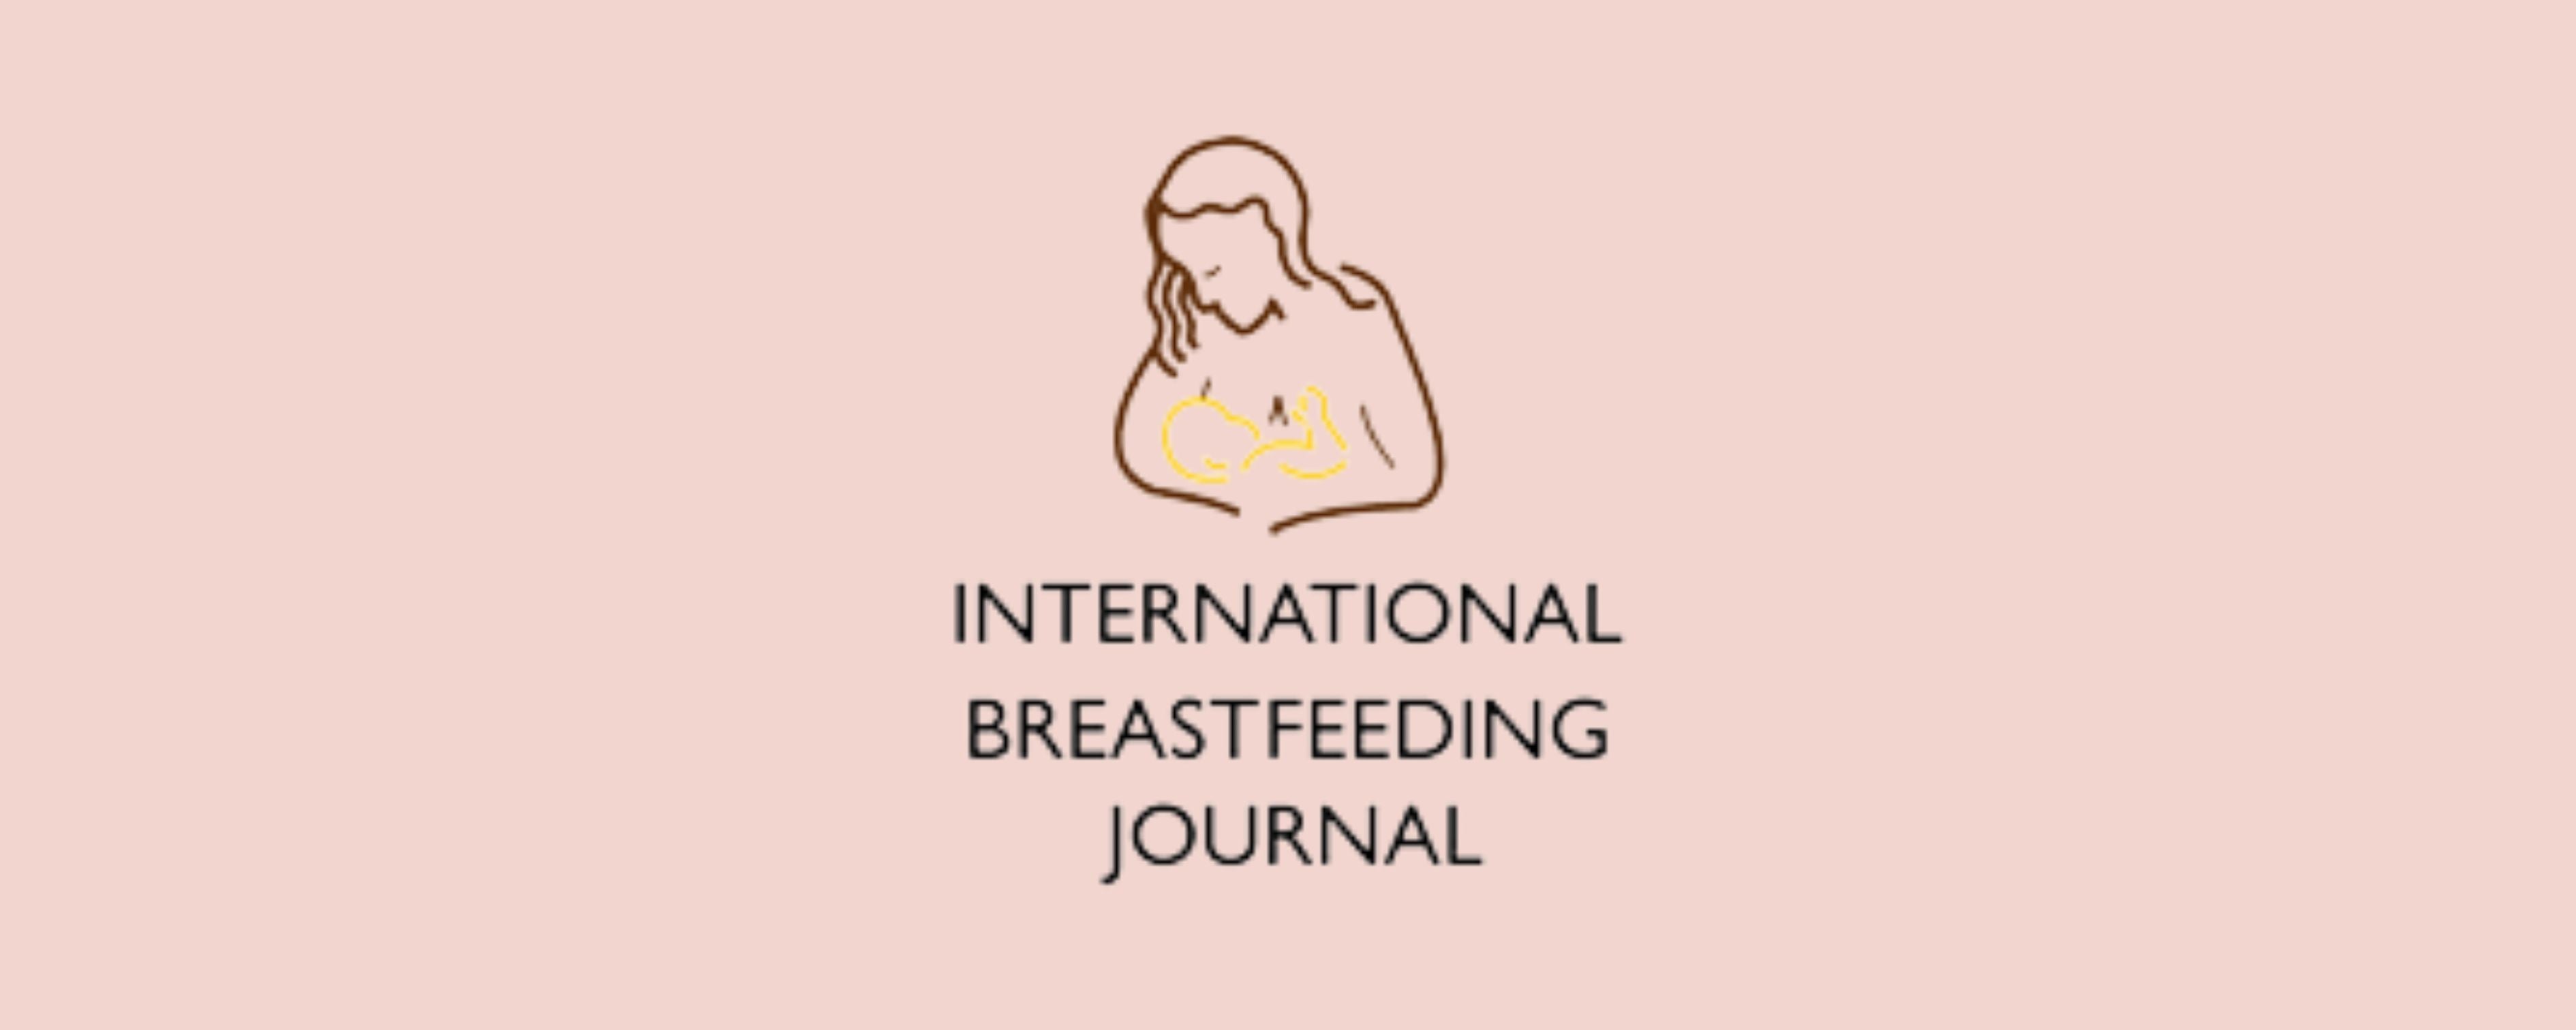 Independent clinical trial on Lactamo published in the International Breastfeeding Journal